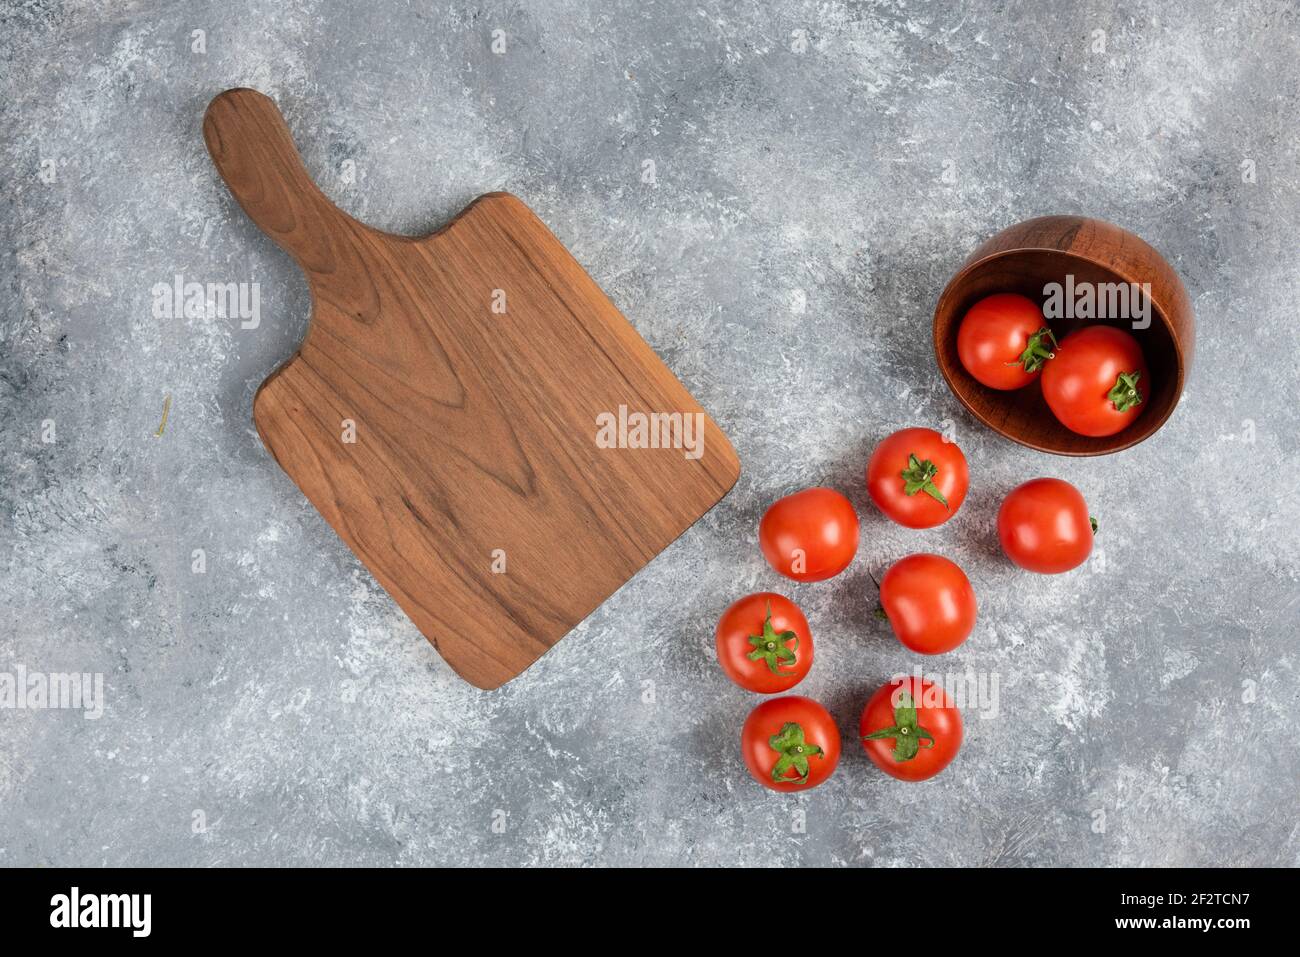 Wooden bowl of red tomatoes with cutting board on marble background Stock Photo